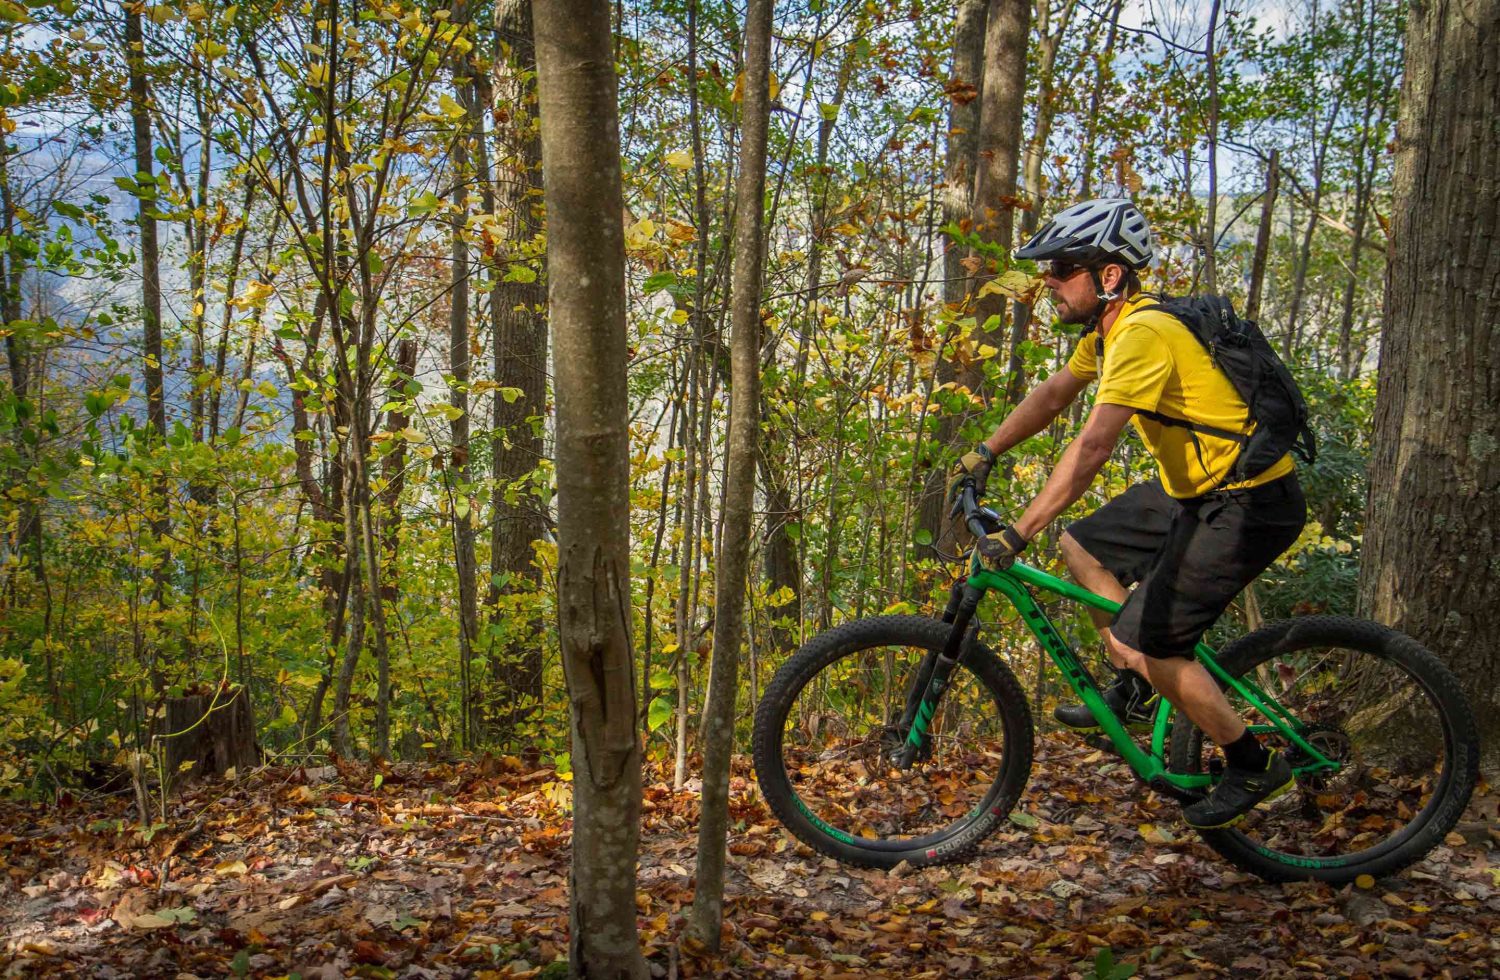 Full Day Guided Mountain Biking, Lower New River Gorge